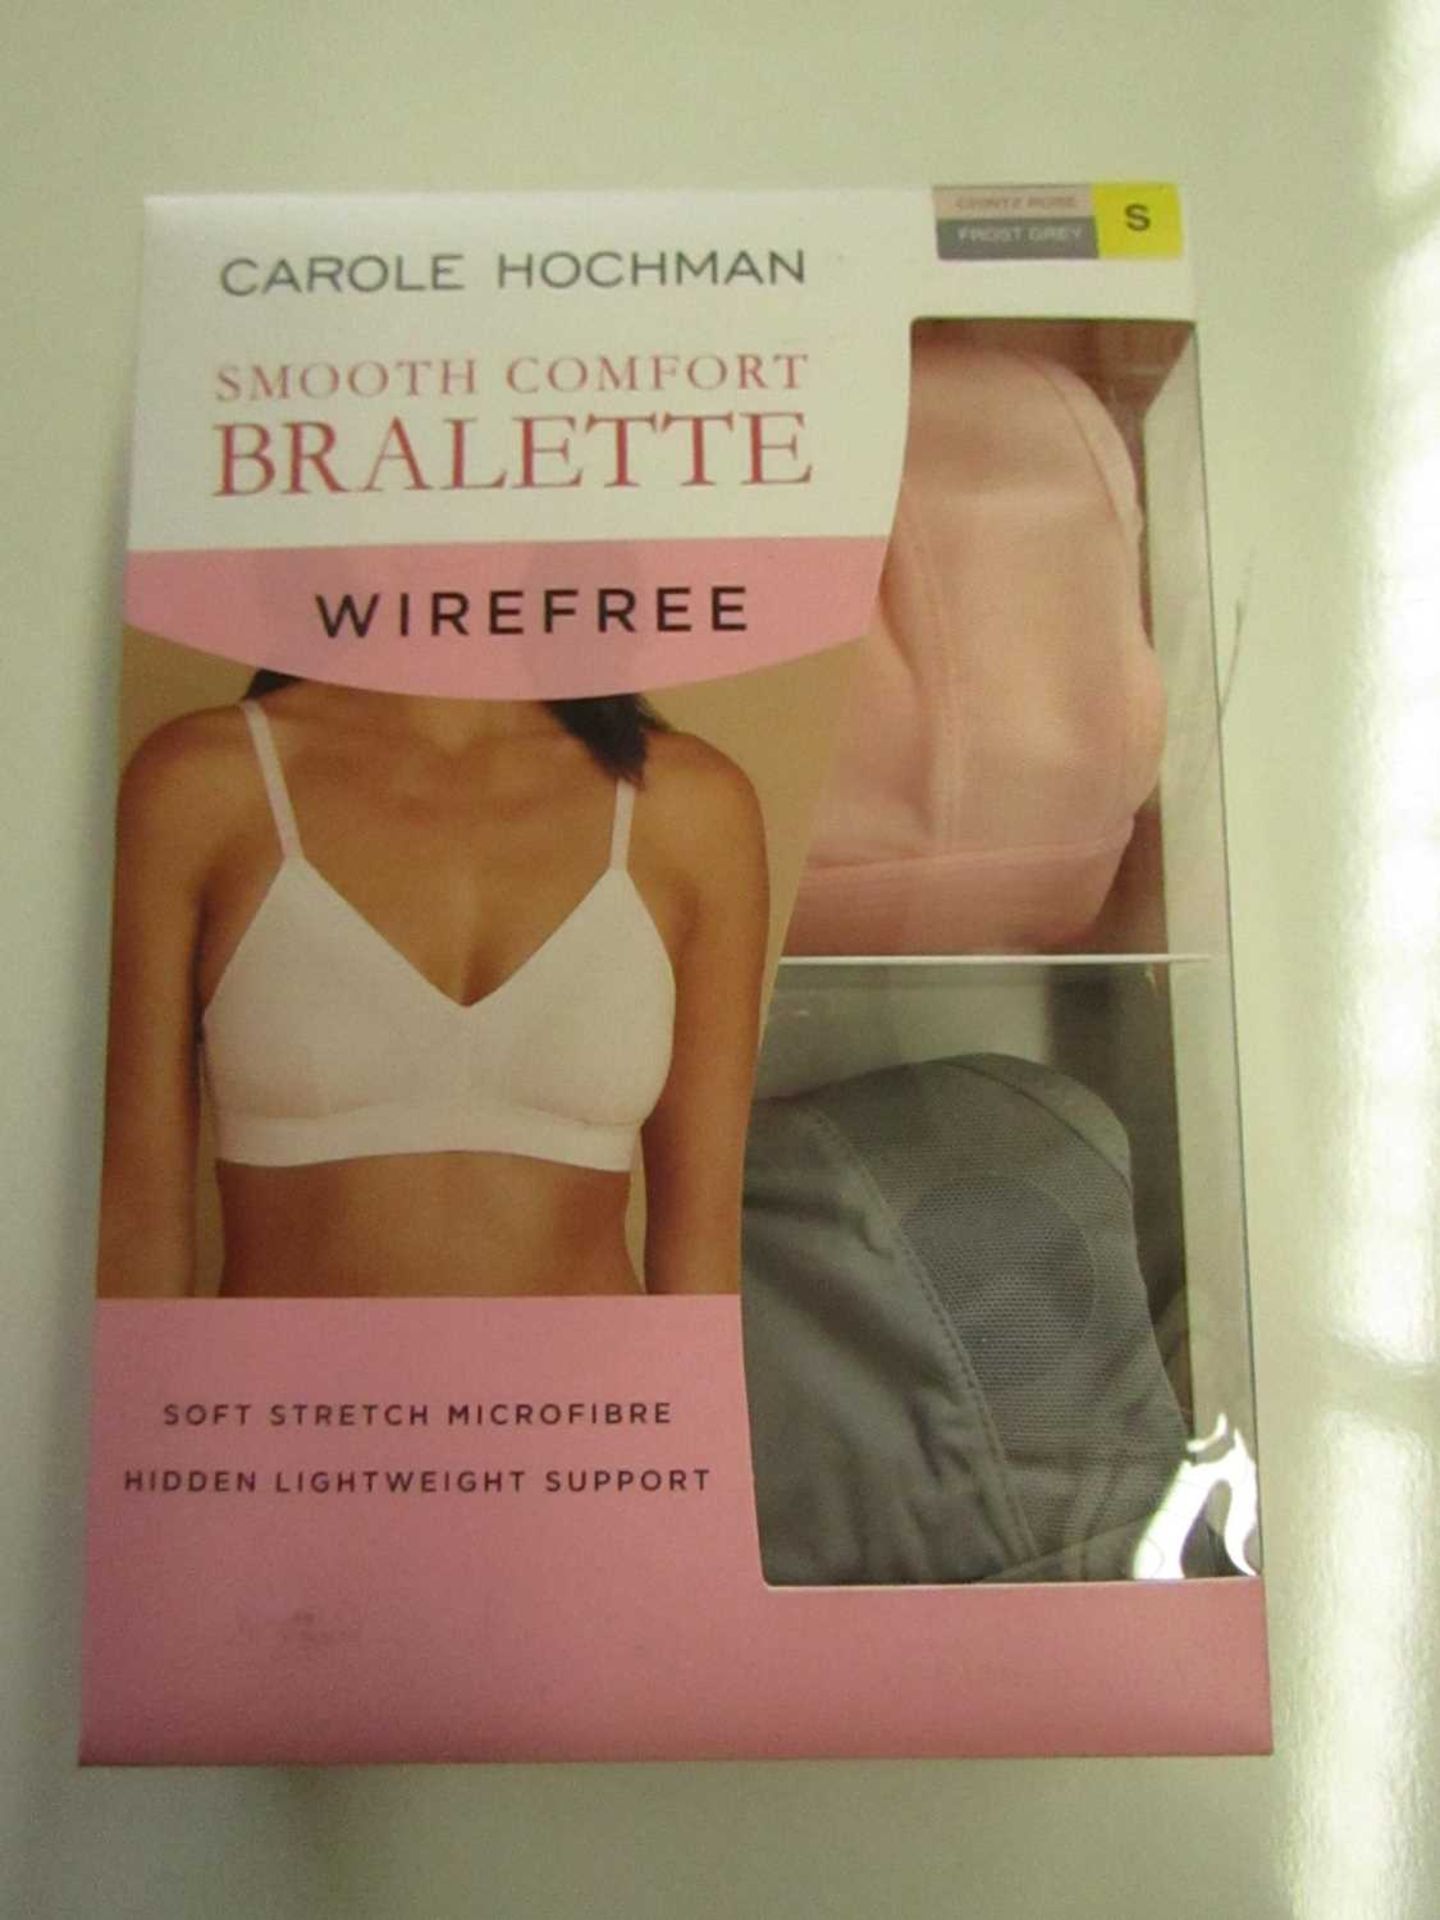 VAT PK of 2 Carole Hochman Wirefree Bralette Size S New & Boxed (Picked at Randon So Colours Will